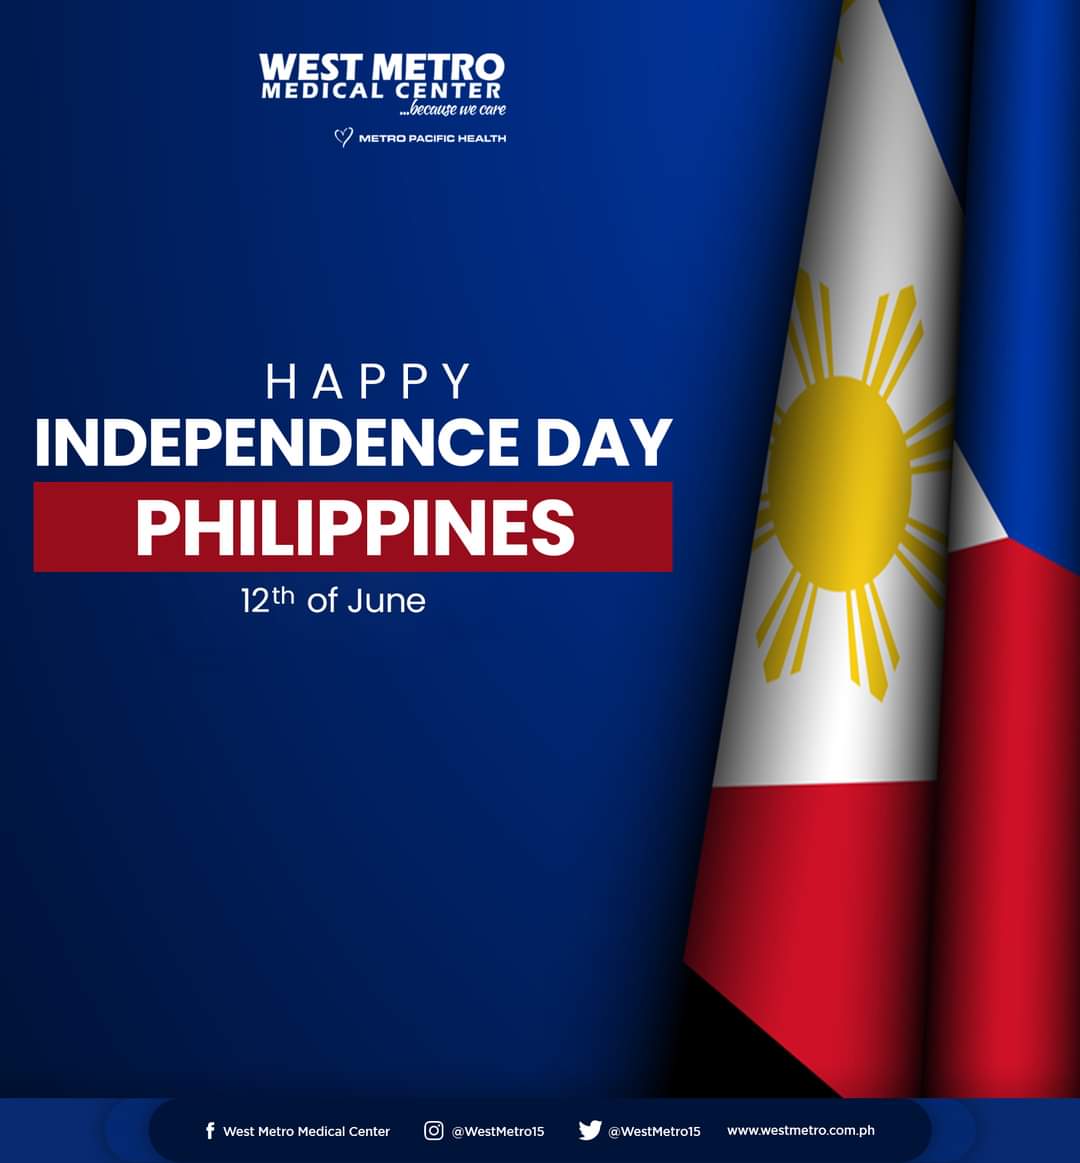 Happy 125th Independence Day, Philippines!

#WestMetroMedicalCenter #BecauseWeCare #happyindependenceday2023